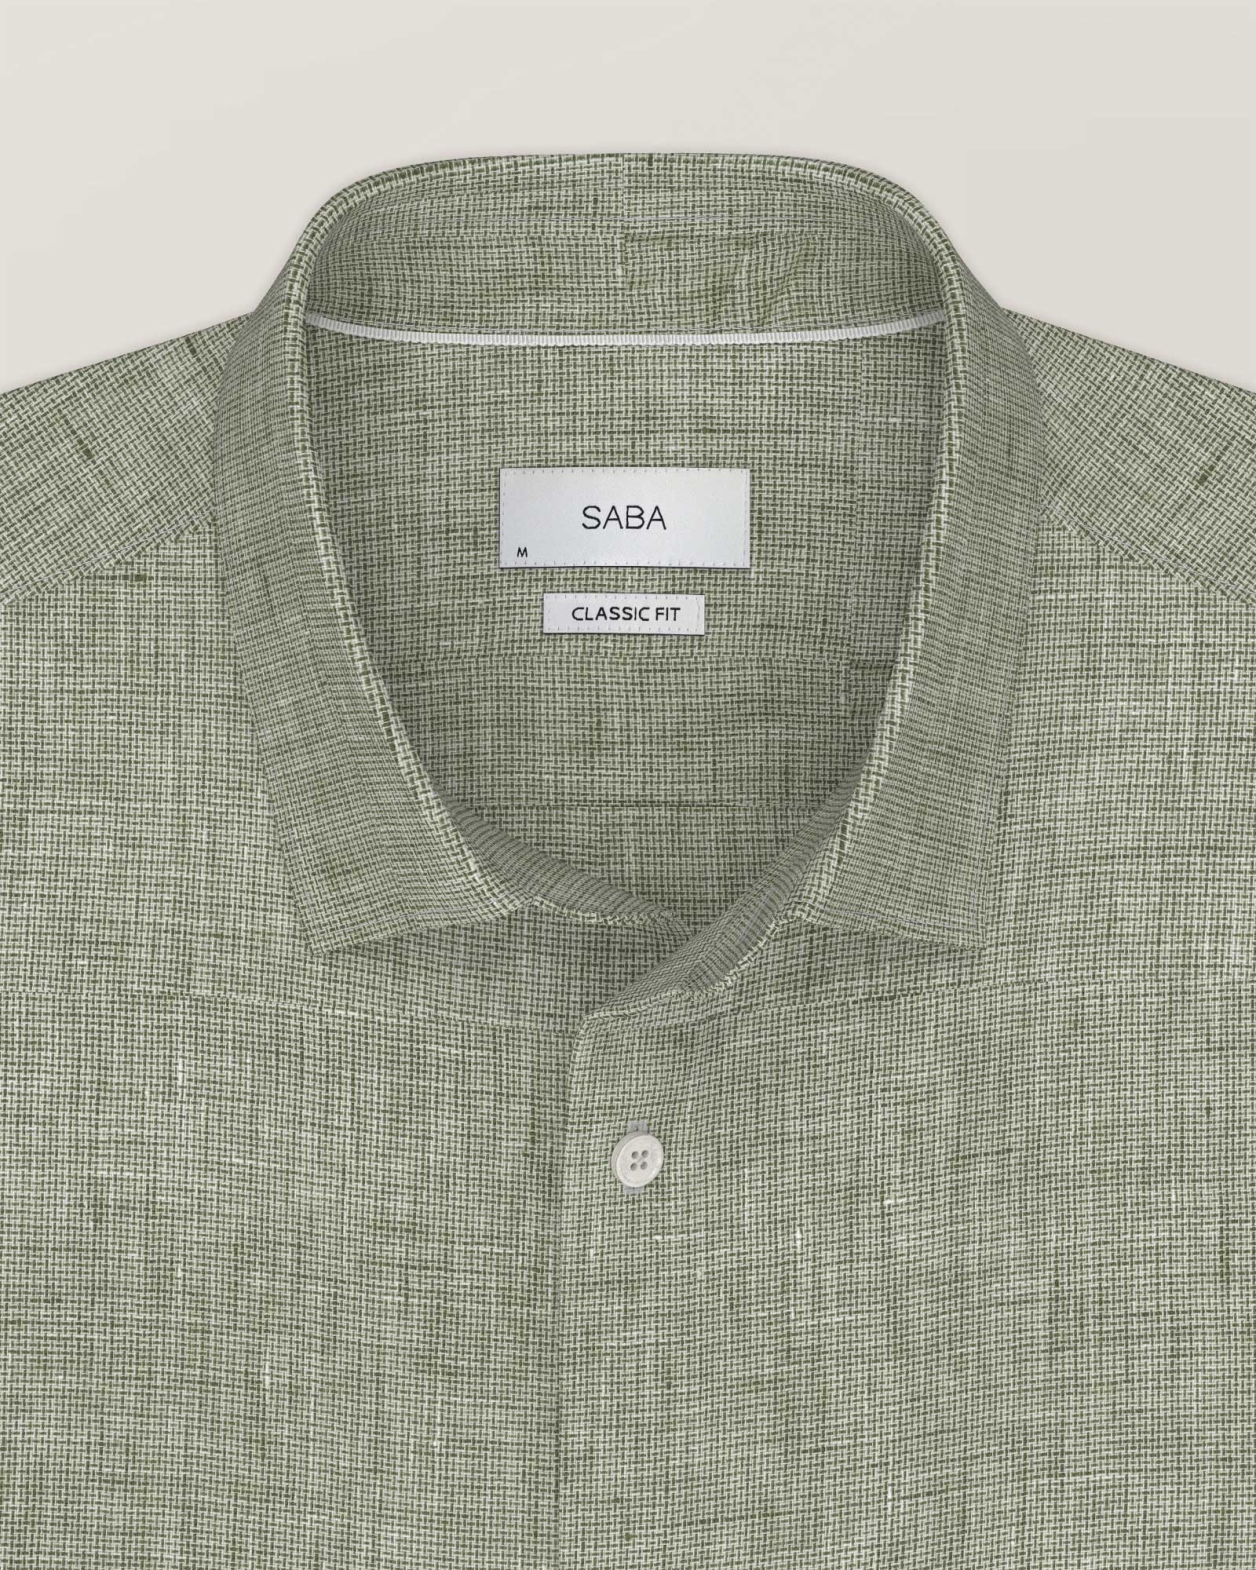 Anderson Classic Yarn Dyed Linen Shirt in GREEN